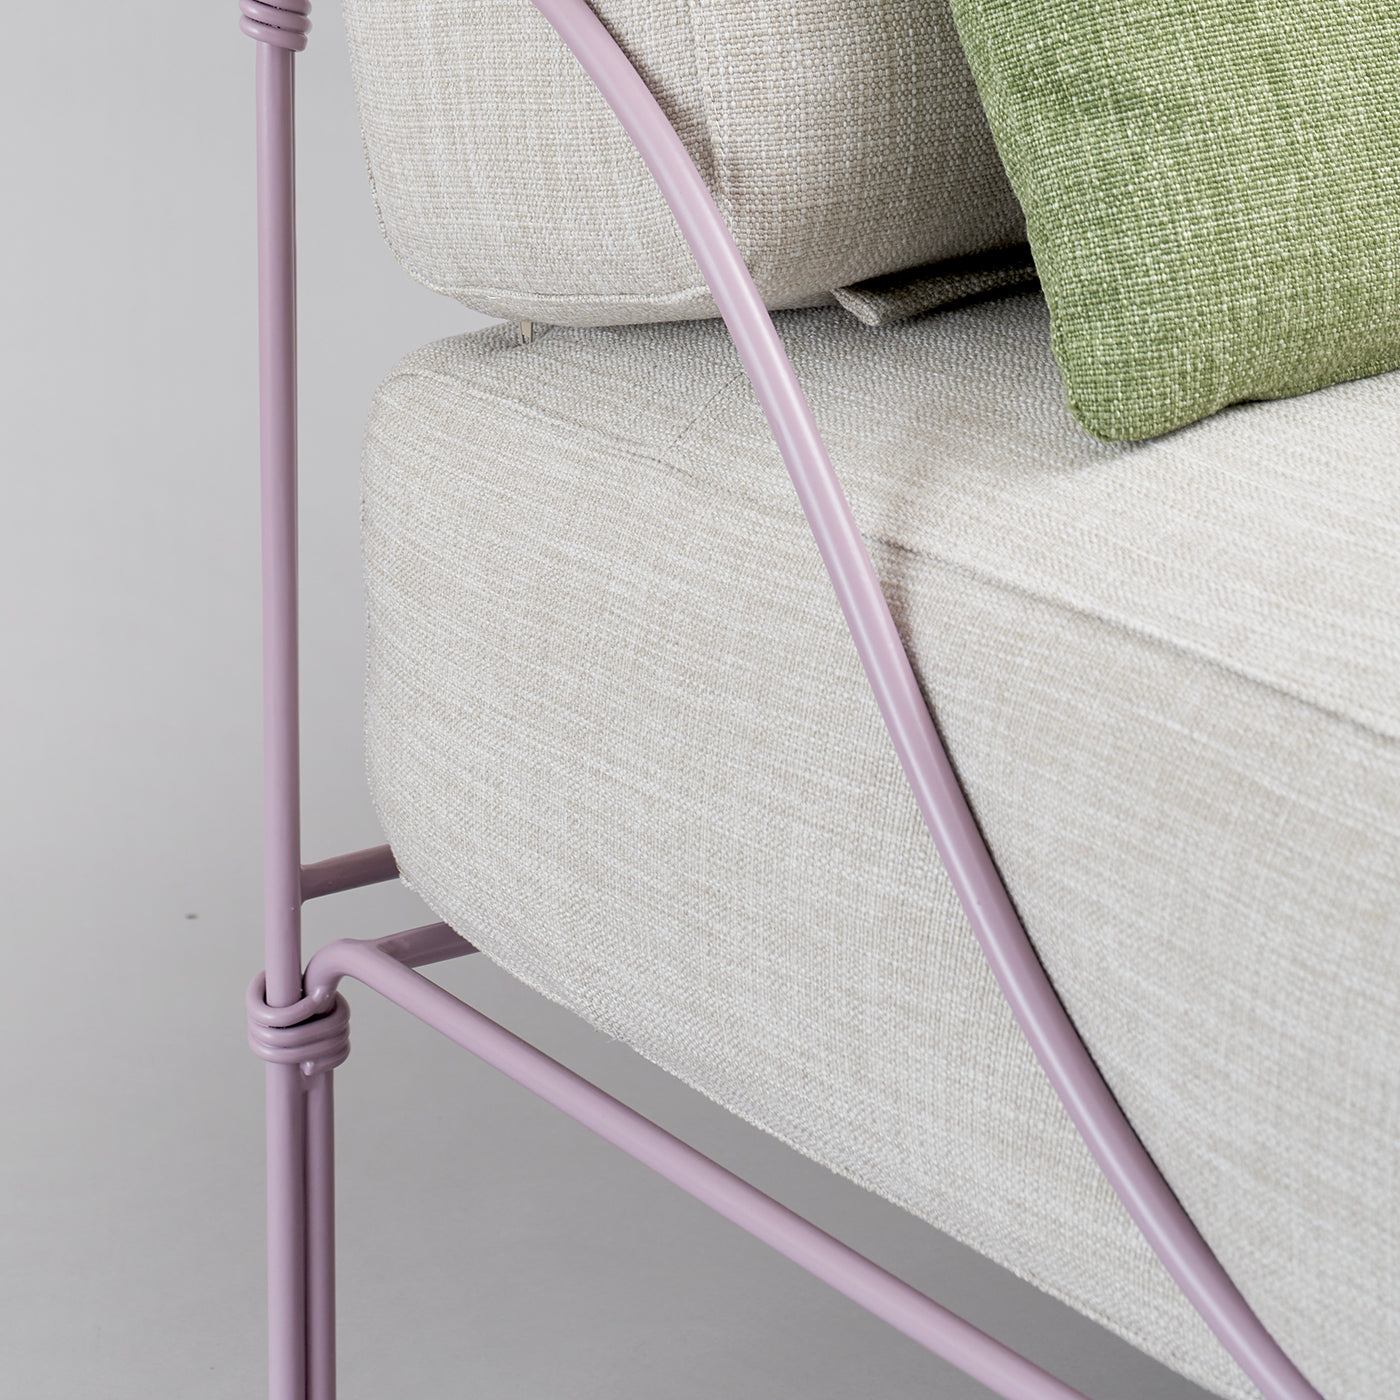 Vitis Lilac and Gray Armchair by Ciarmroli Queda Studio in Stainless Steel - Alternative view 4